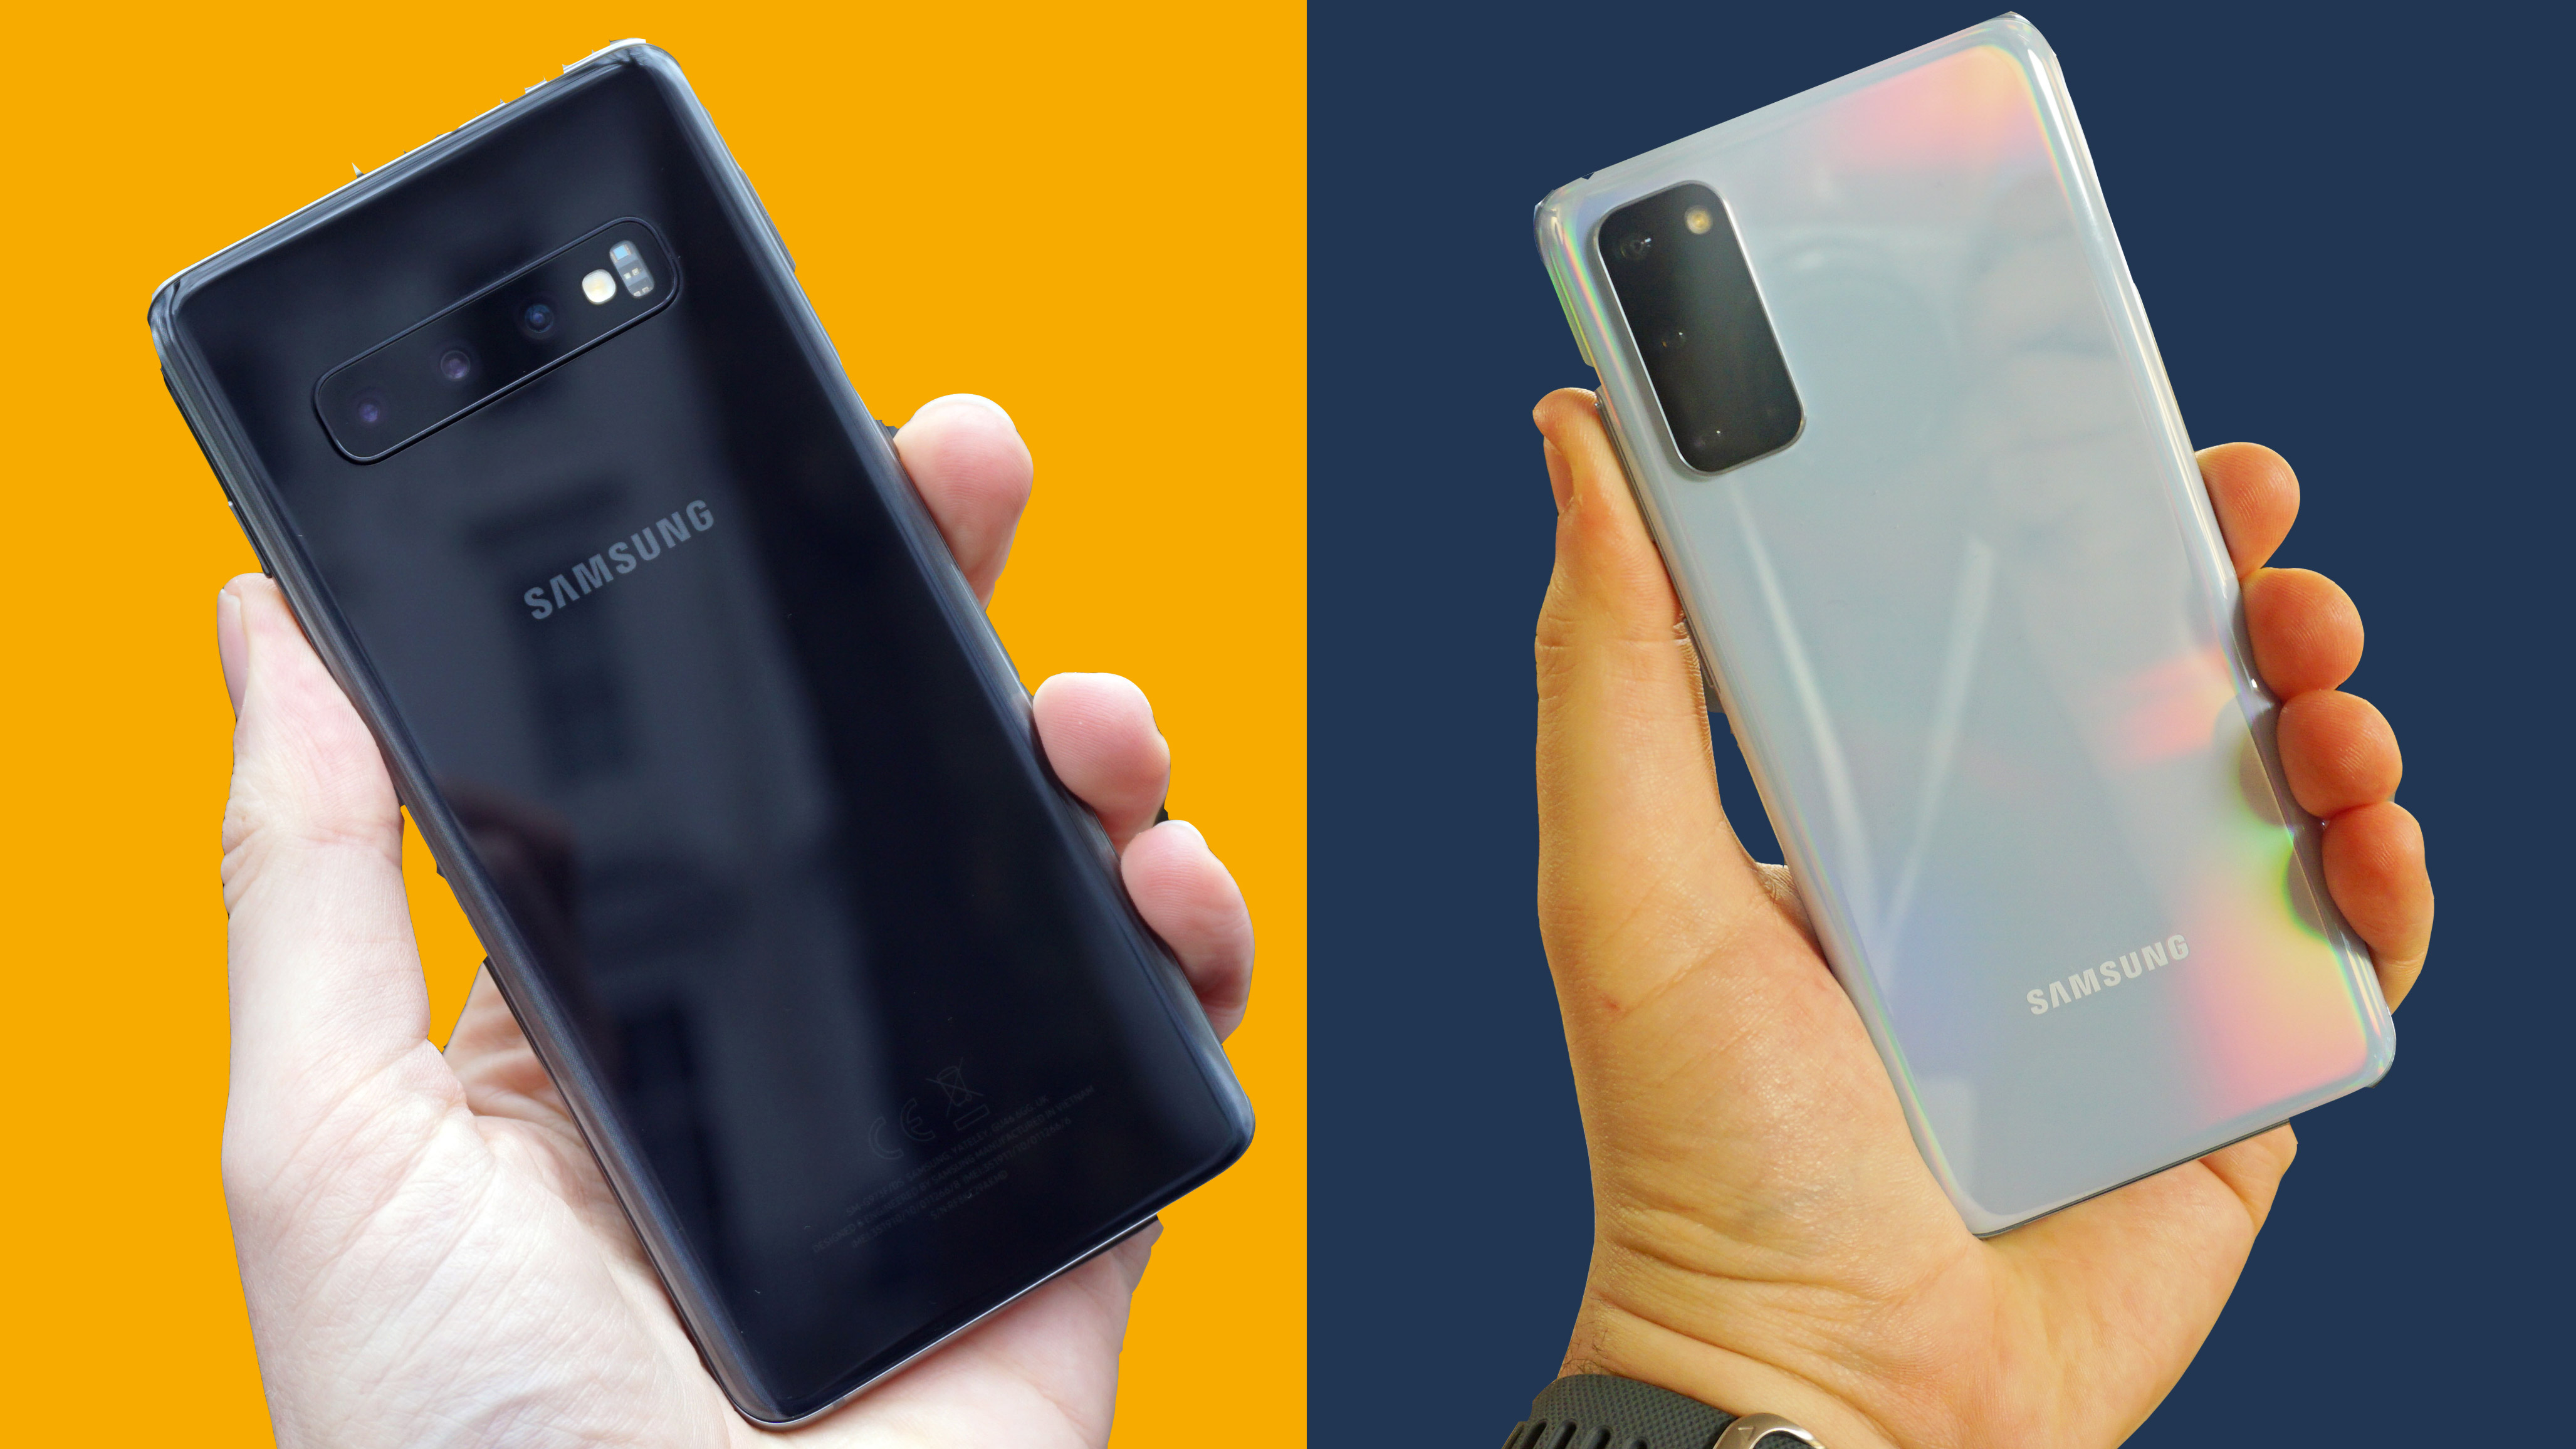 Samsung Galaxy S20 Vs Galaxy S10 Comparing Samsungs New And Old Flagships Techradar 